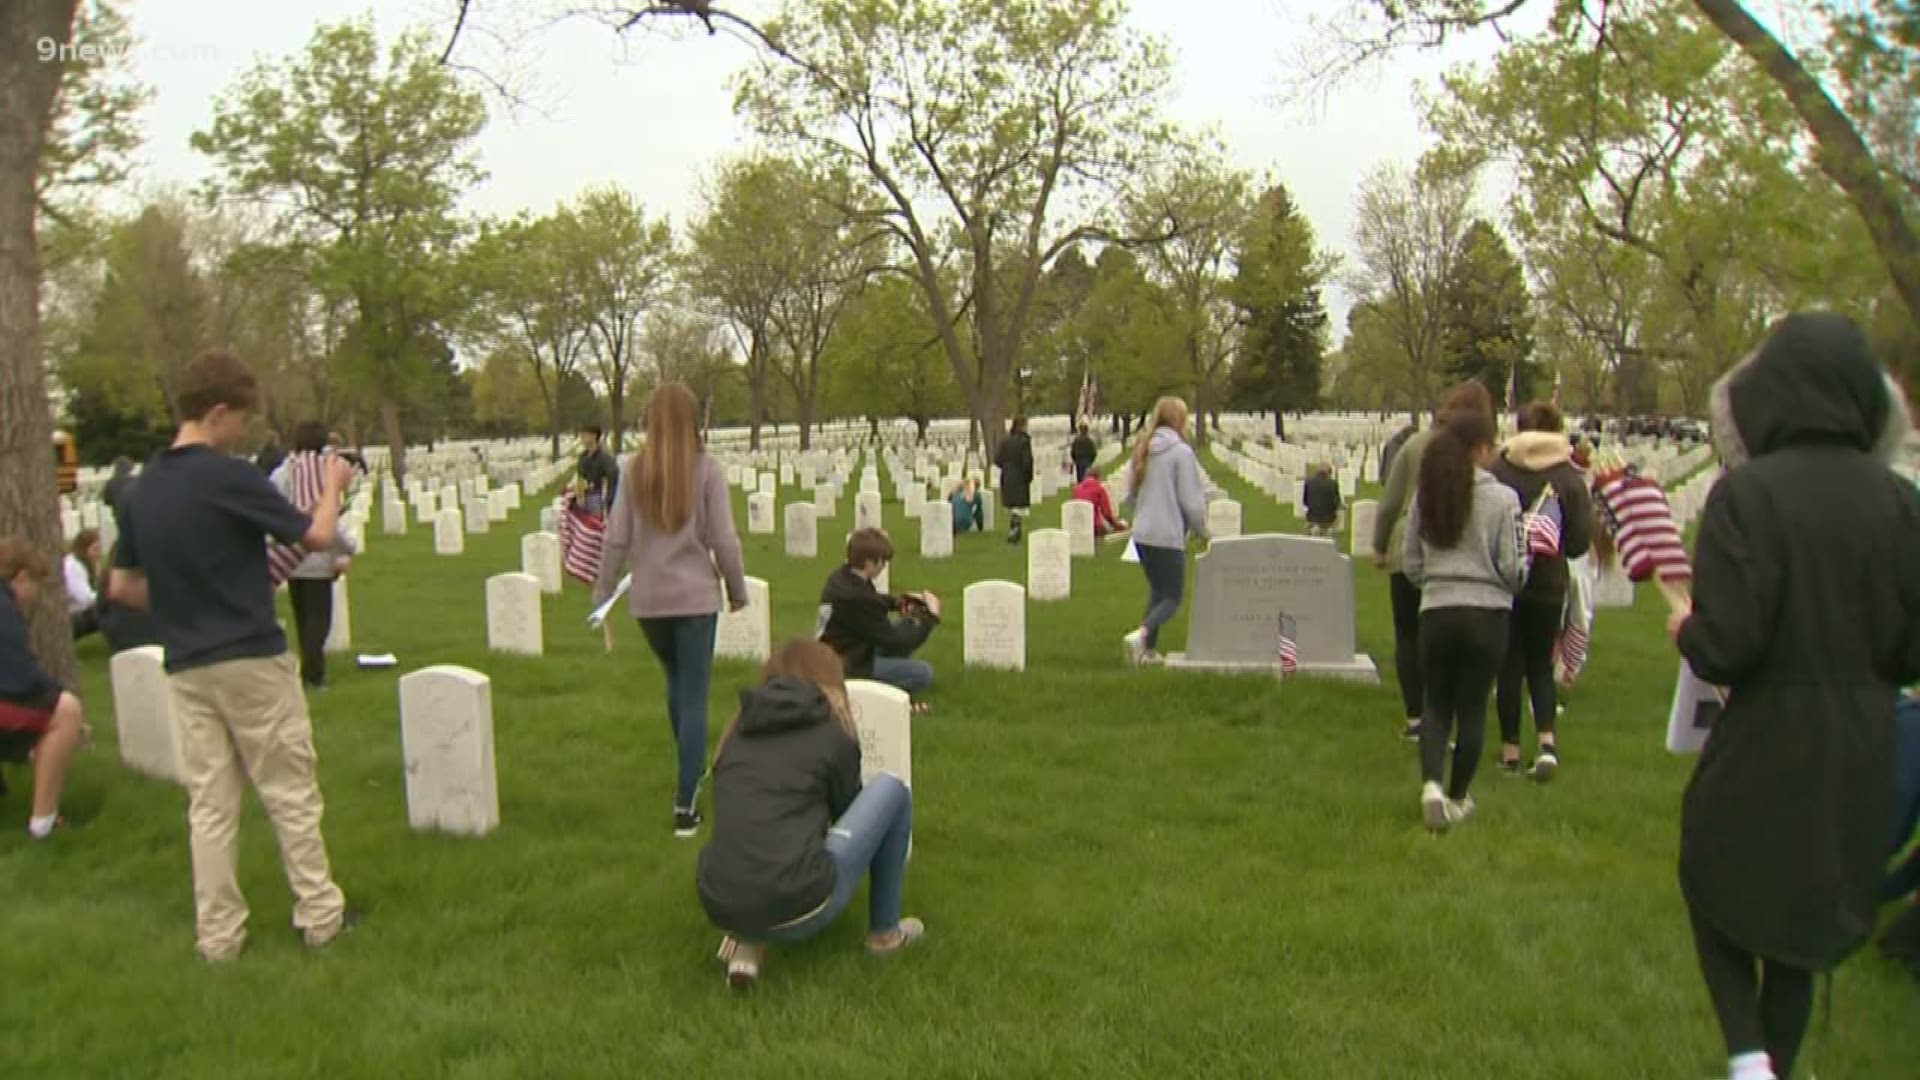 On the last day of school, eighth graders from West Middle School in Greenwood Village place flags on the graves of soldiers and their families as the end of a yearlong history lesson entitled, “Freedom isn’t free”.